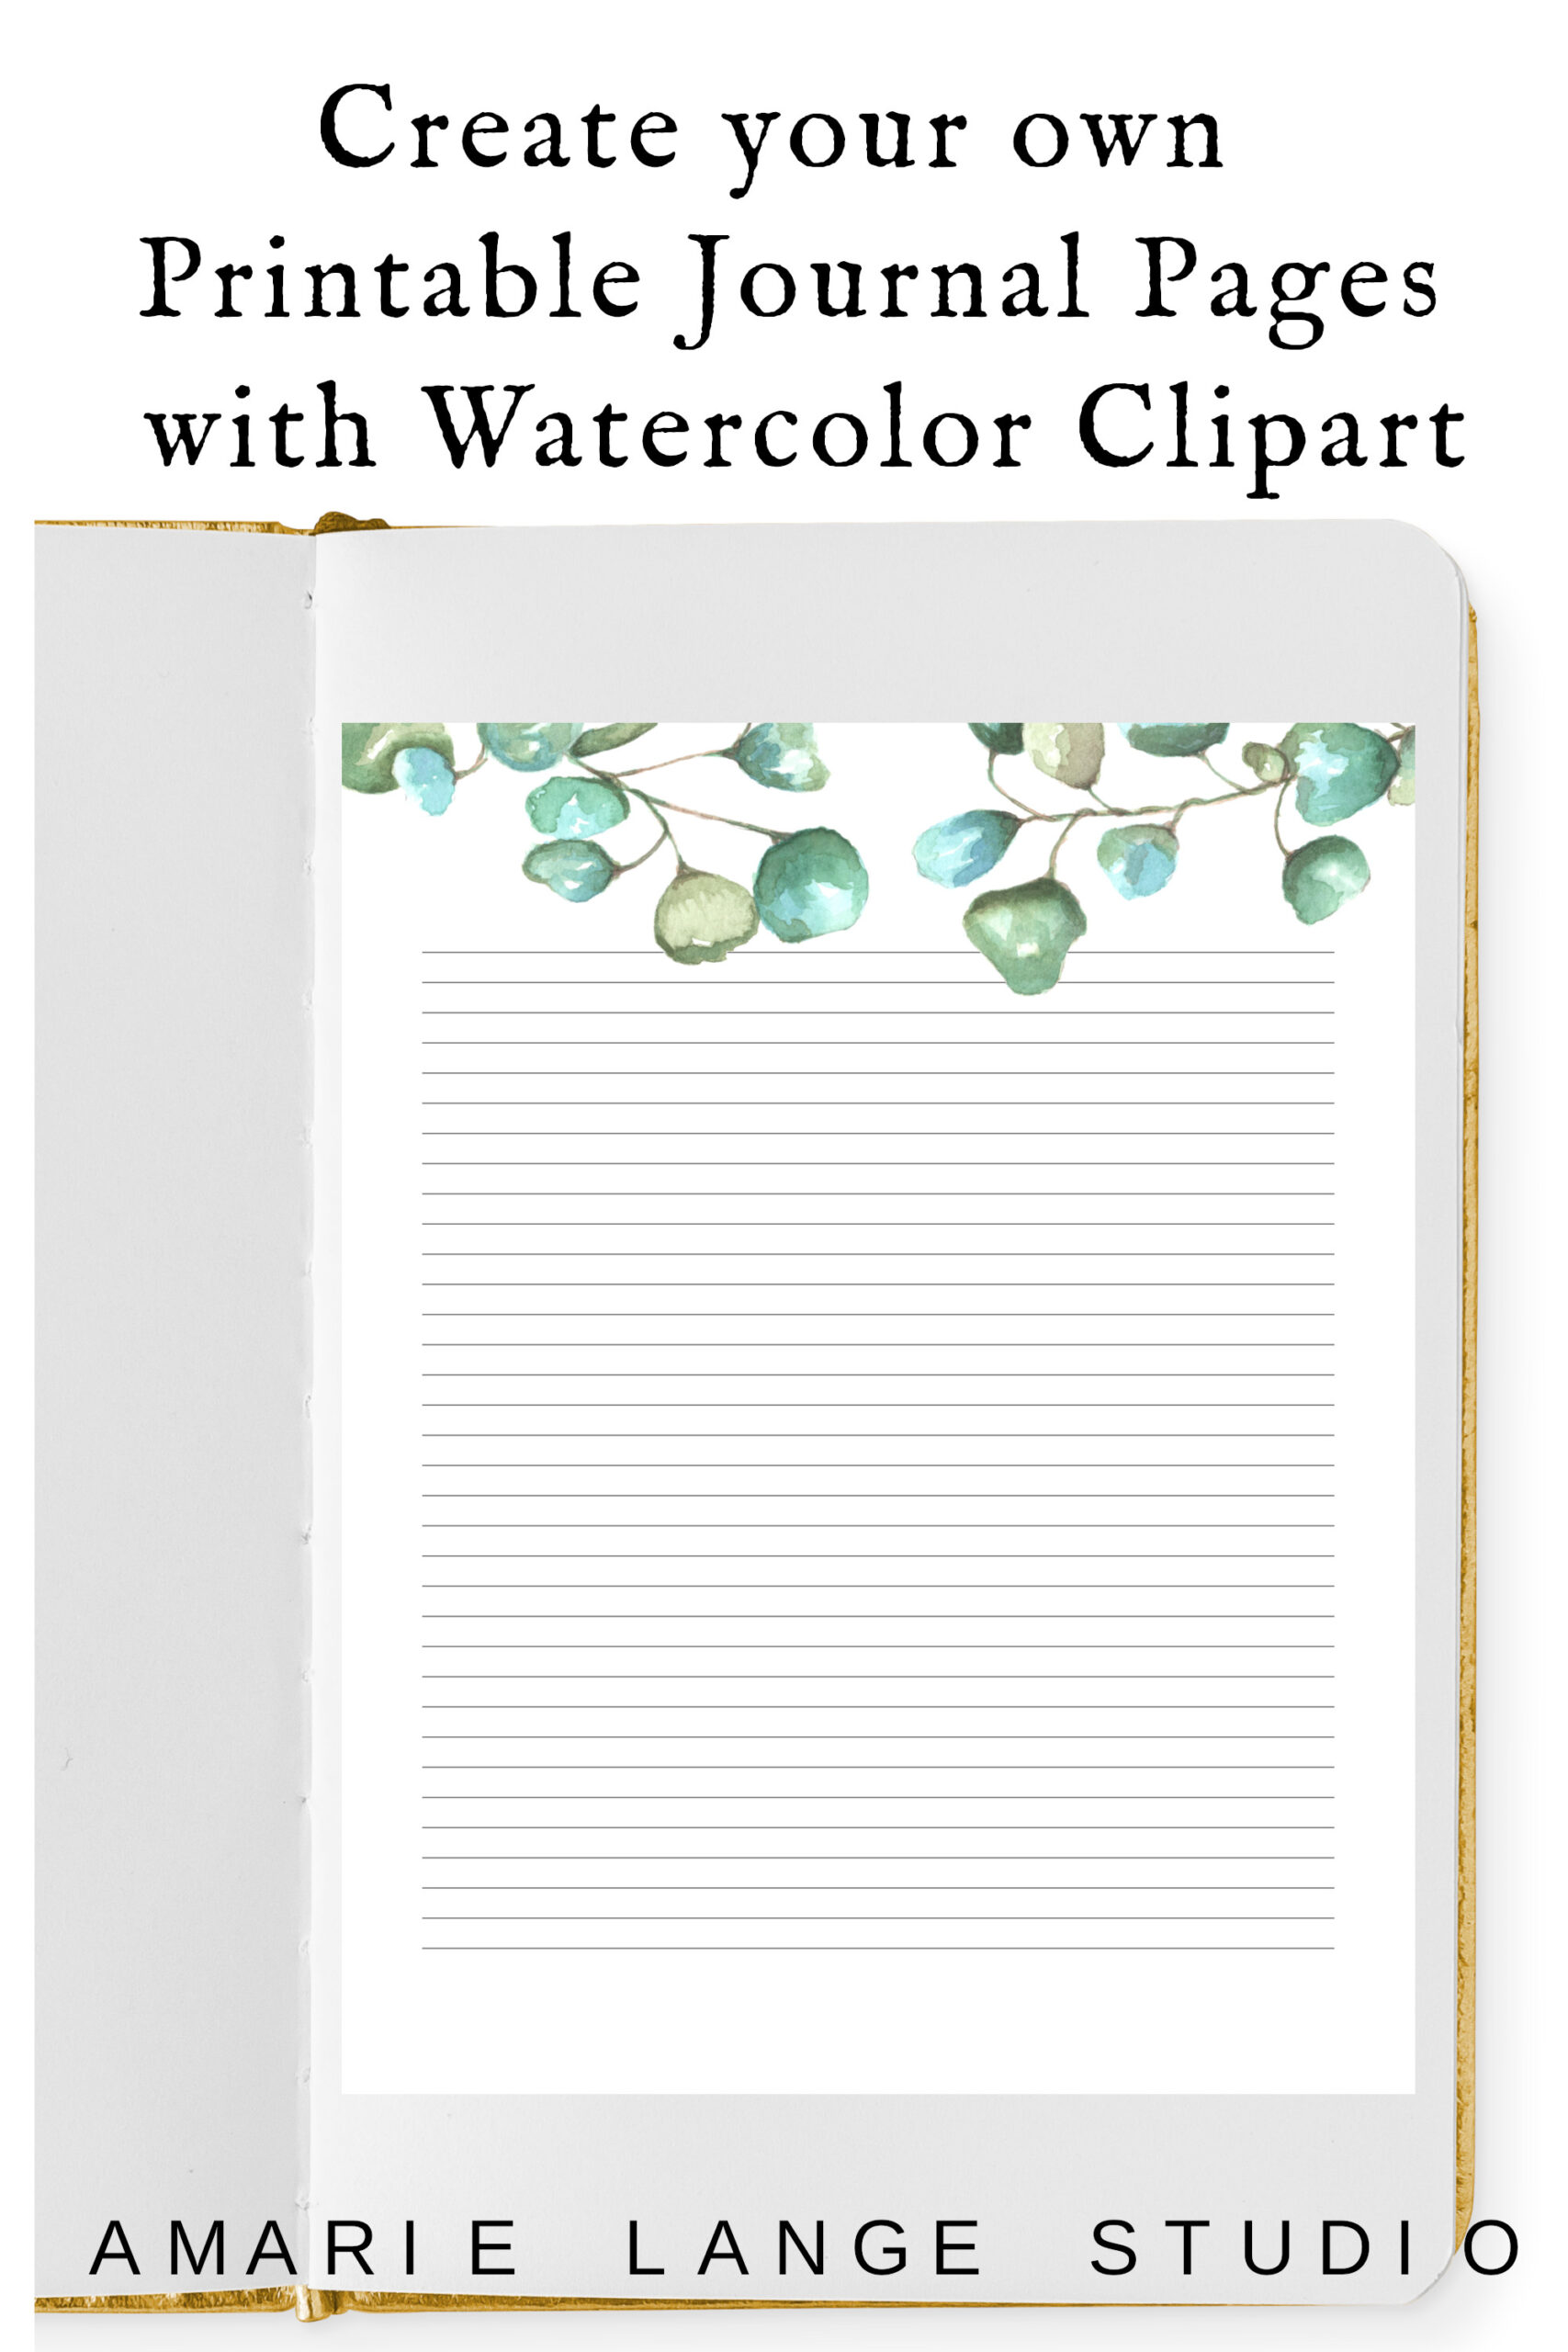 free lined paper clipart